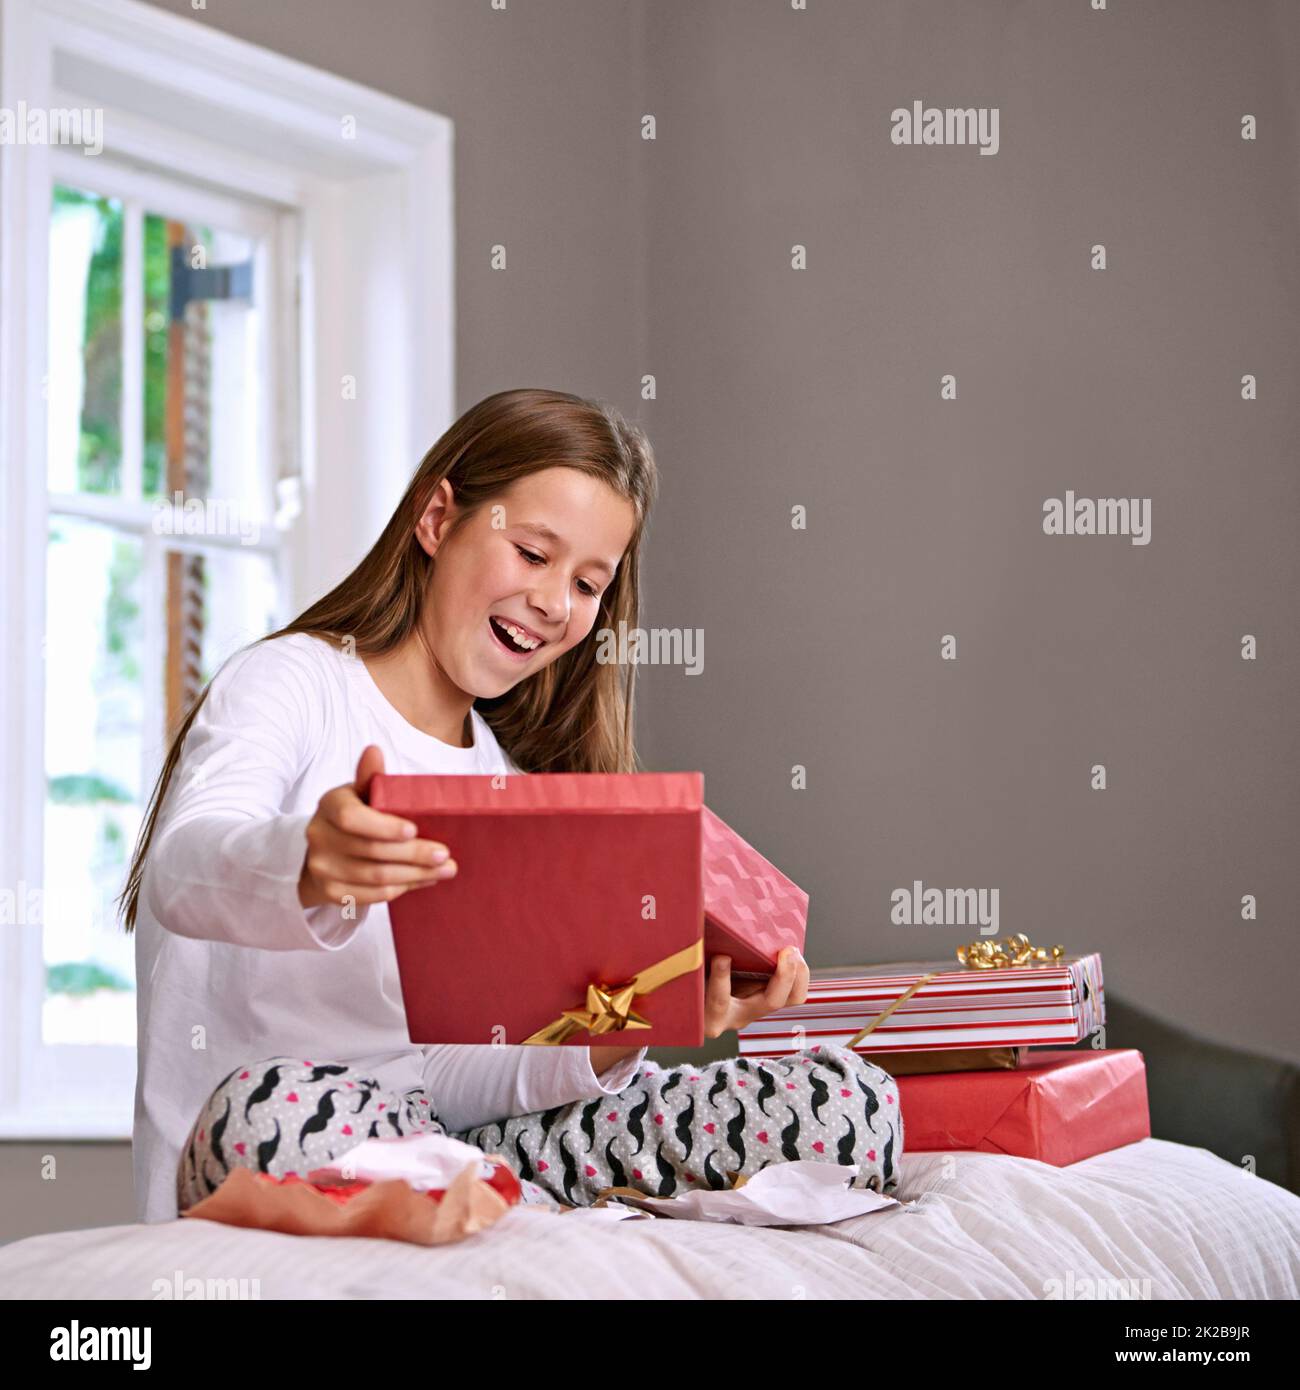 Its just what I wanted. Shot of an excited young girl opening her birthday gifts. Stock Photo